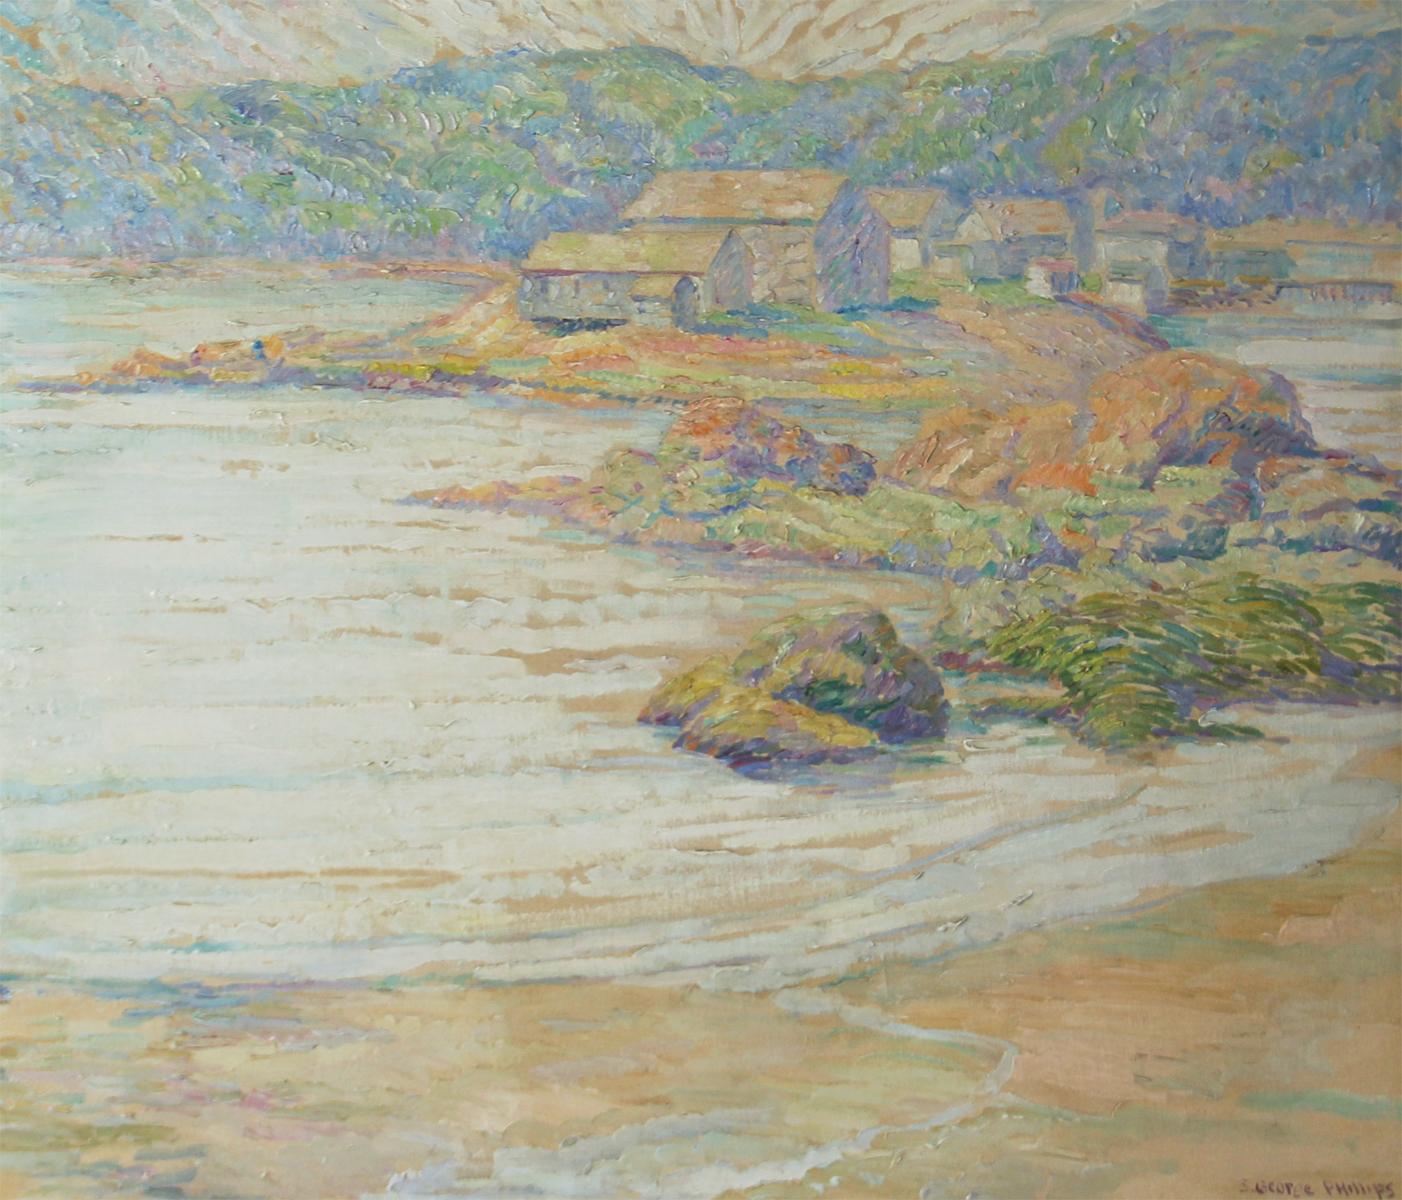 Research Center in Maine, American Impressionist Landscape, Oil on Board, 1930's - Painting by Samuel George Phillips